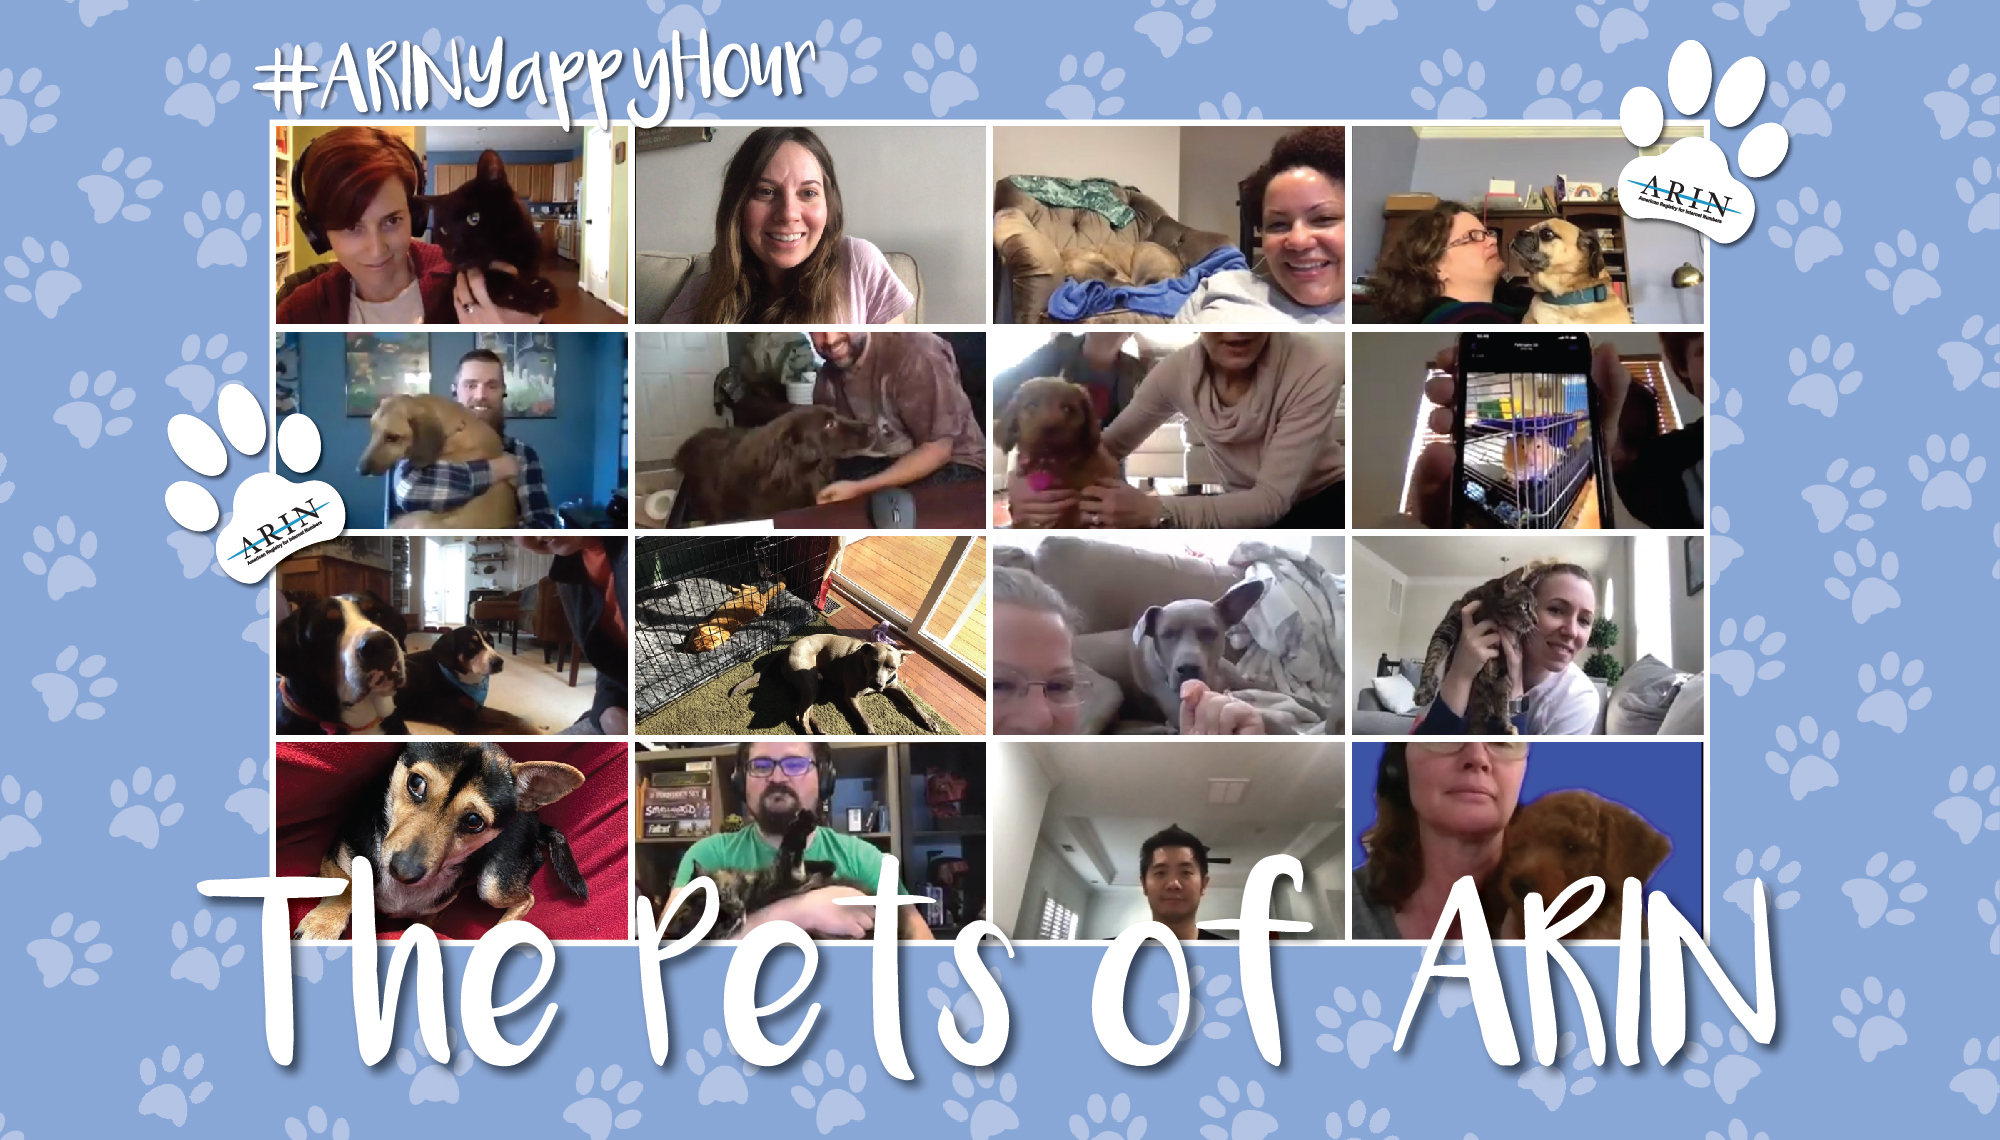 Pets of ARIN "Yappy" Hour!